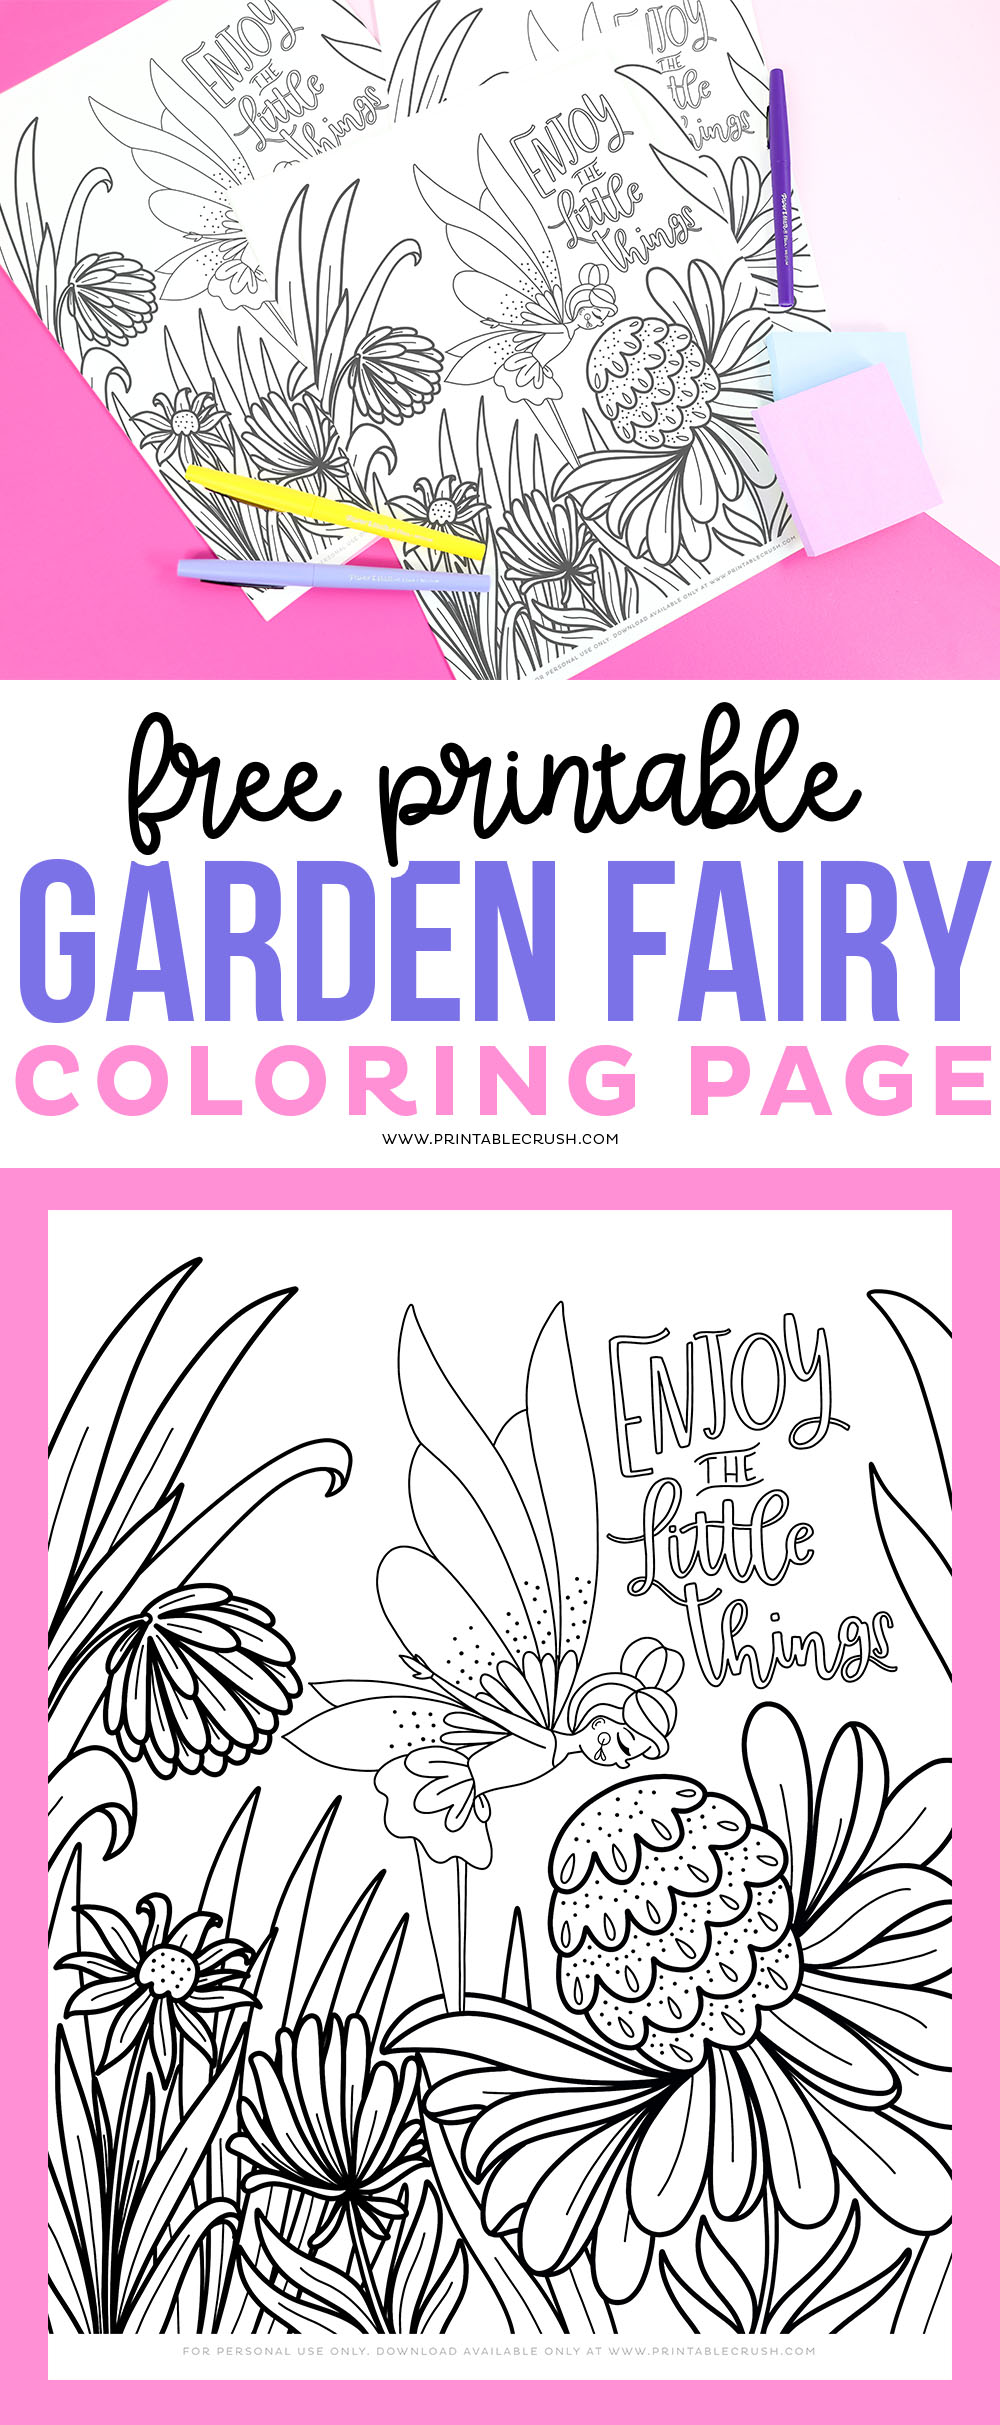 Free garden fairy coloring page